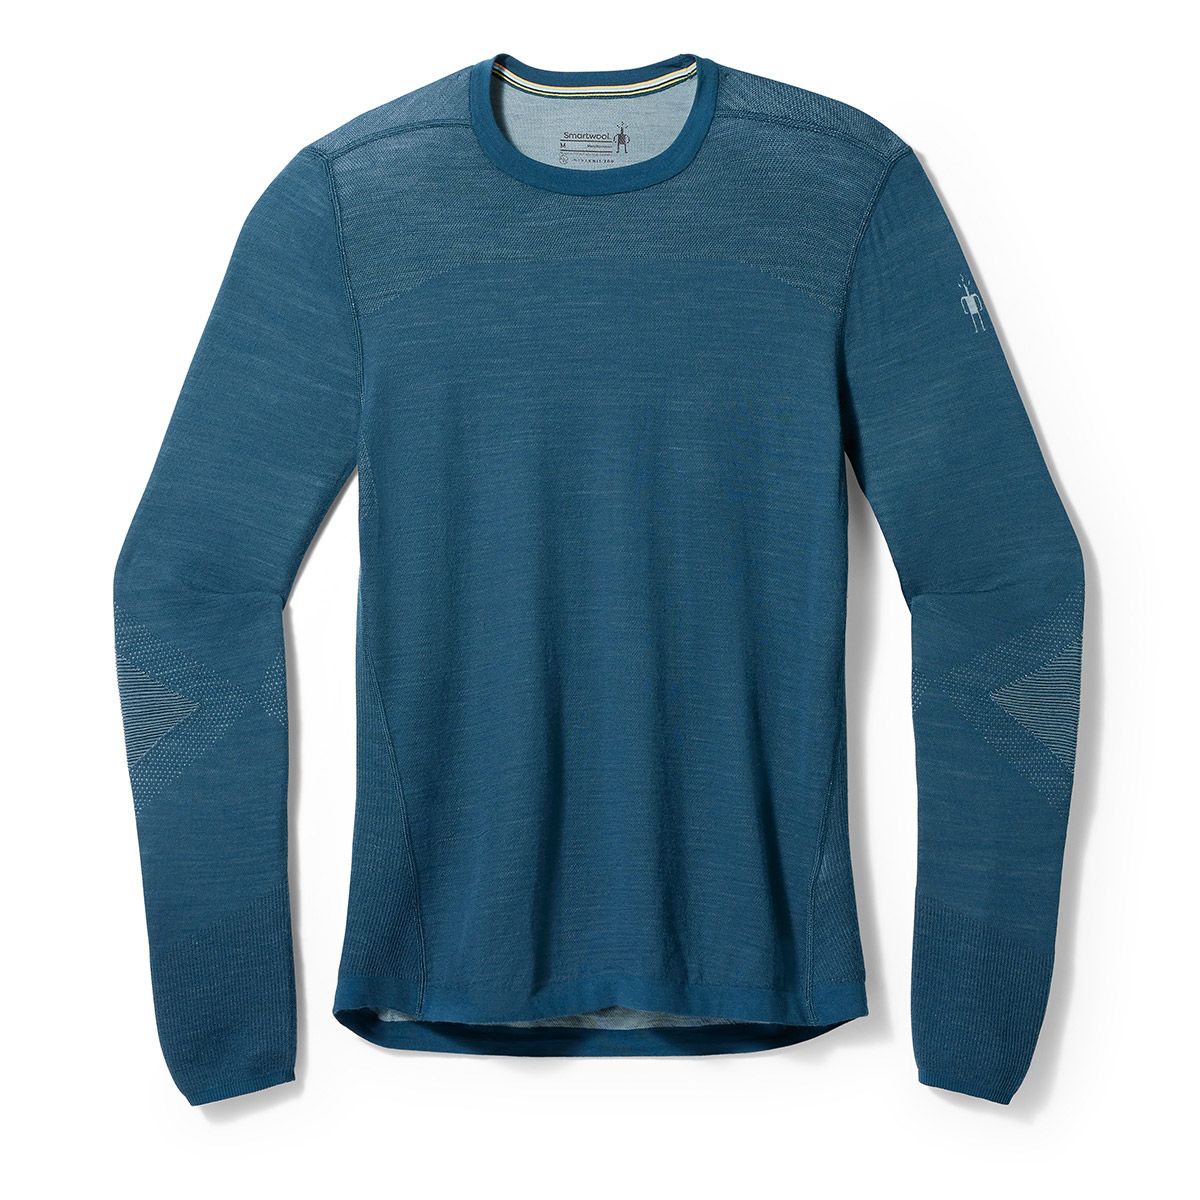 Smartwool Intraknit Thermal Merino 200 Base Layer Pattern Crew - Womens, FREE SHIPPING in Canada